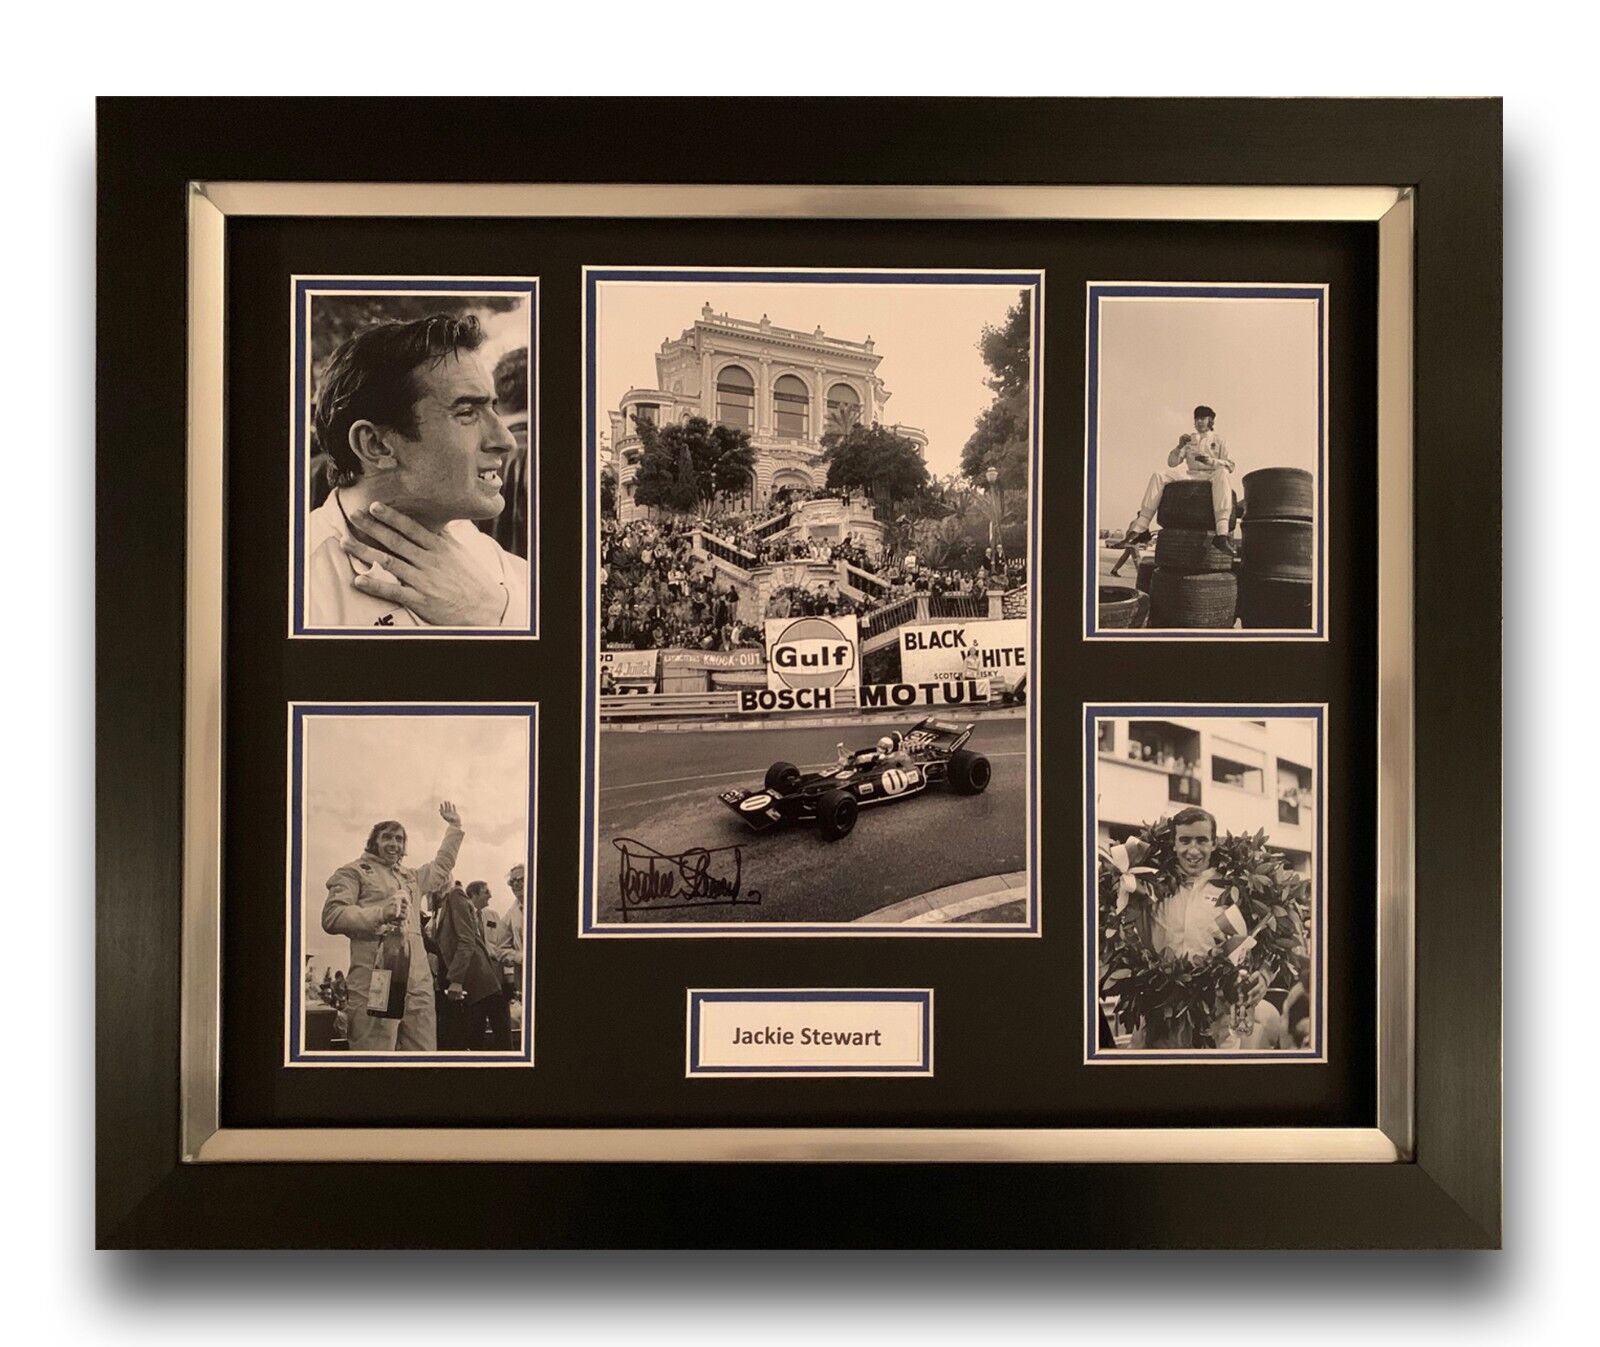 JACKIE STEWART HAND SIGNED FRAMED Photo Poster painting DISPLAY - FORMULA 1 AUTOGRAPH F1.